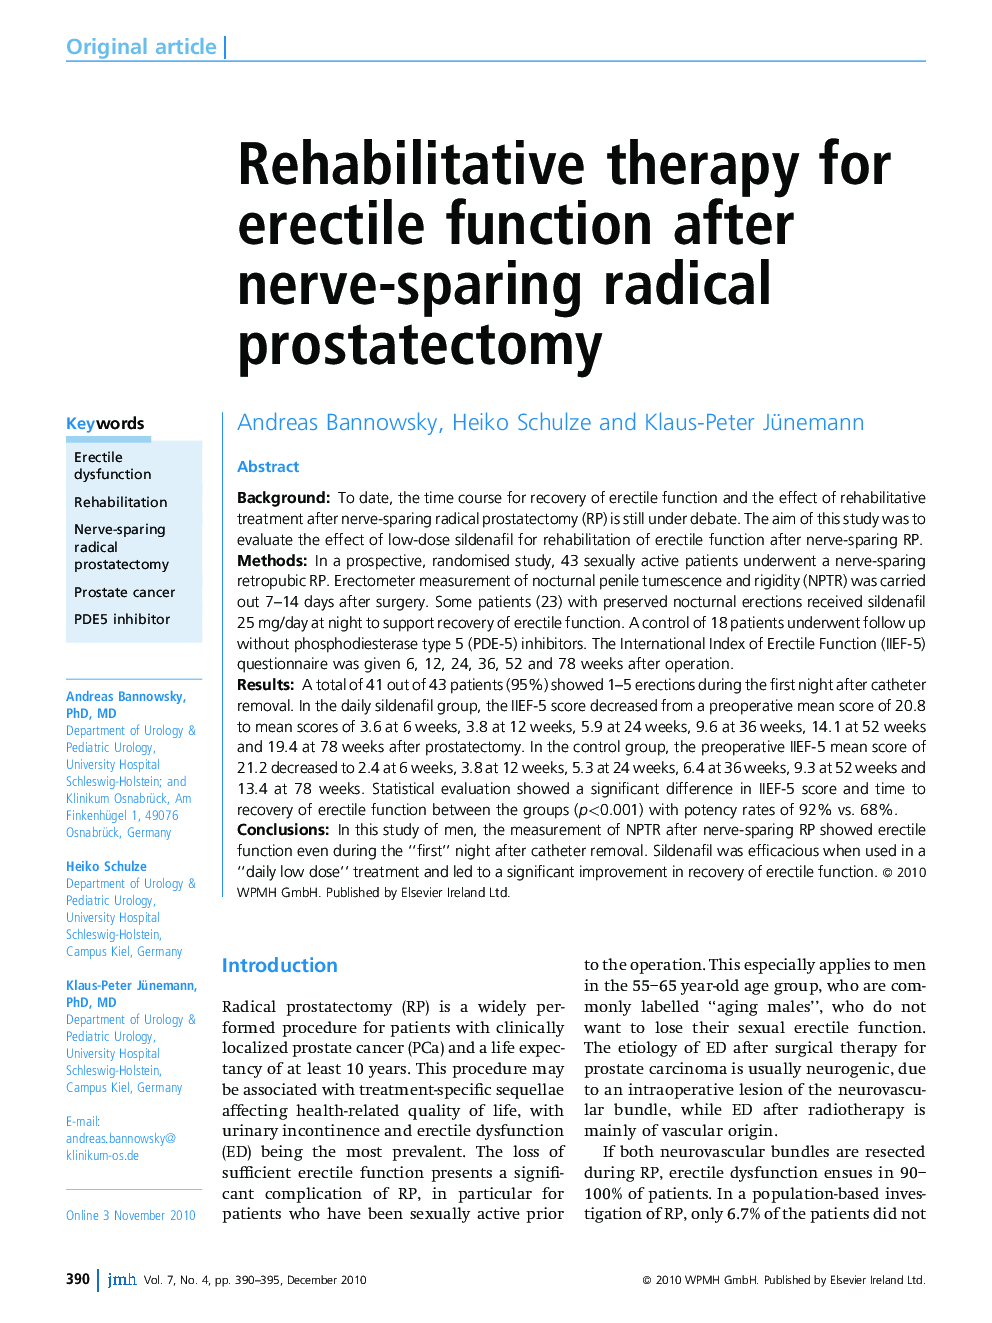 Rehabilitative therapy for erectile function after nerve-sparing radical prostatectomy